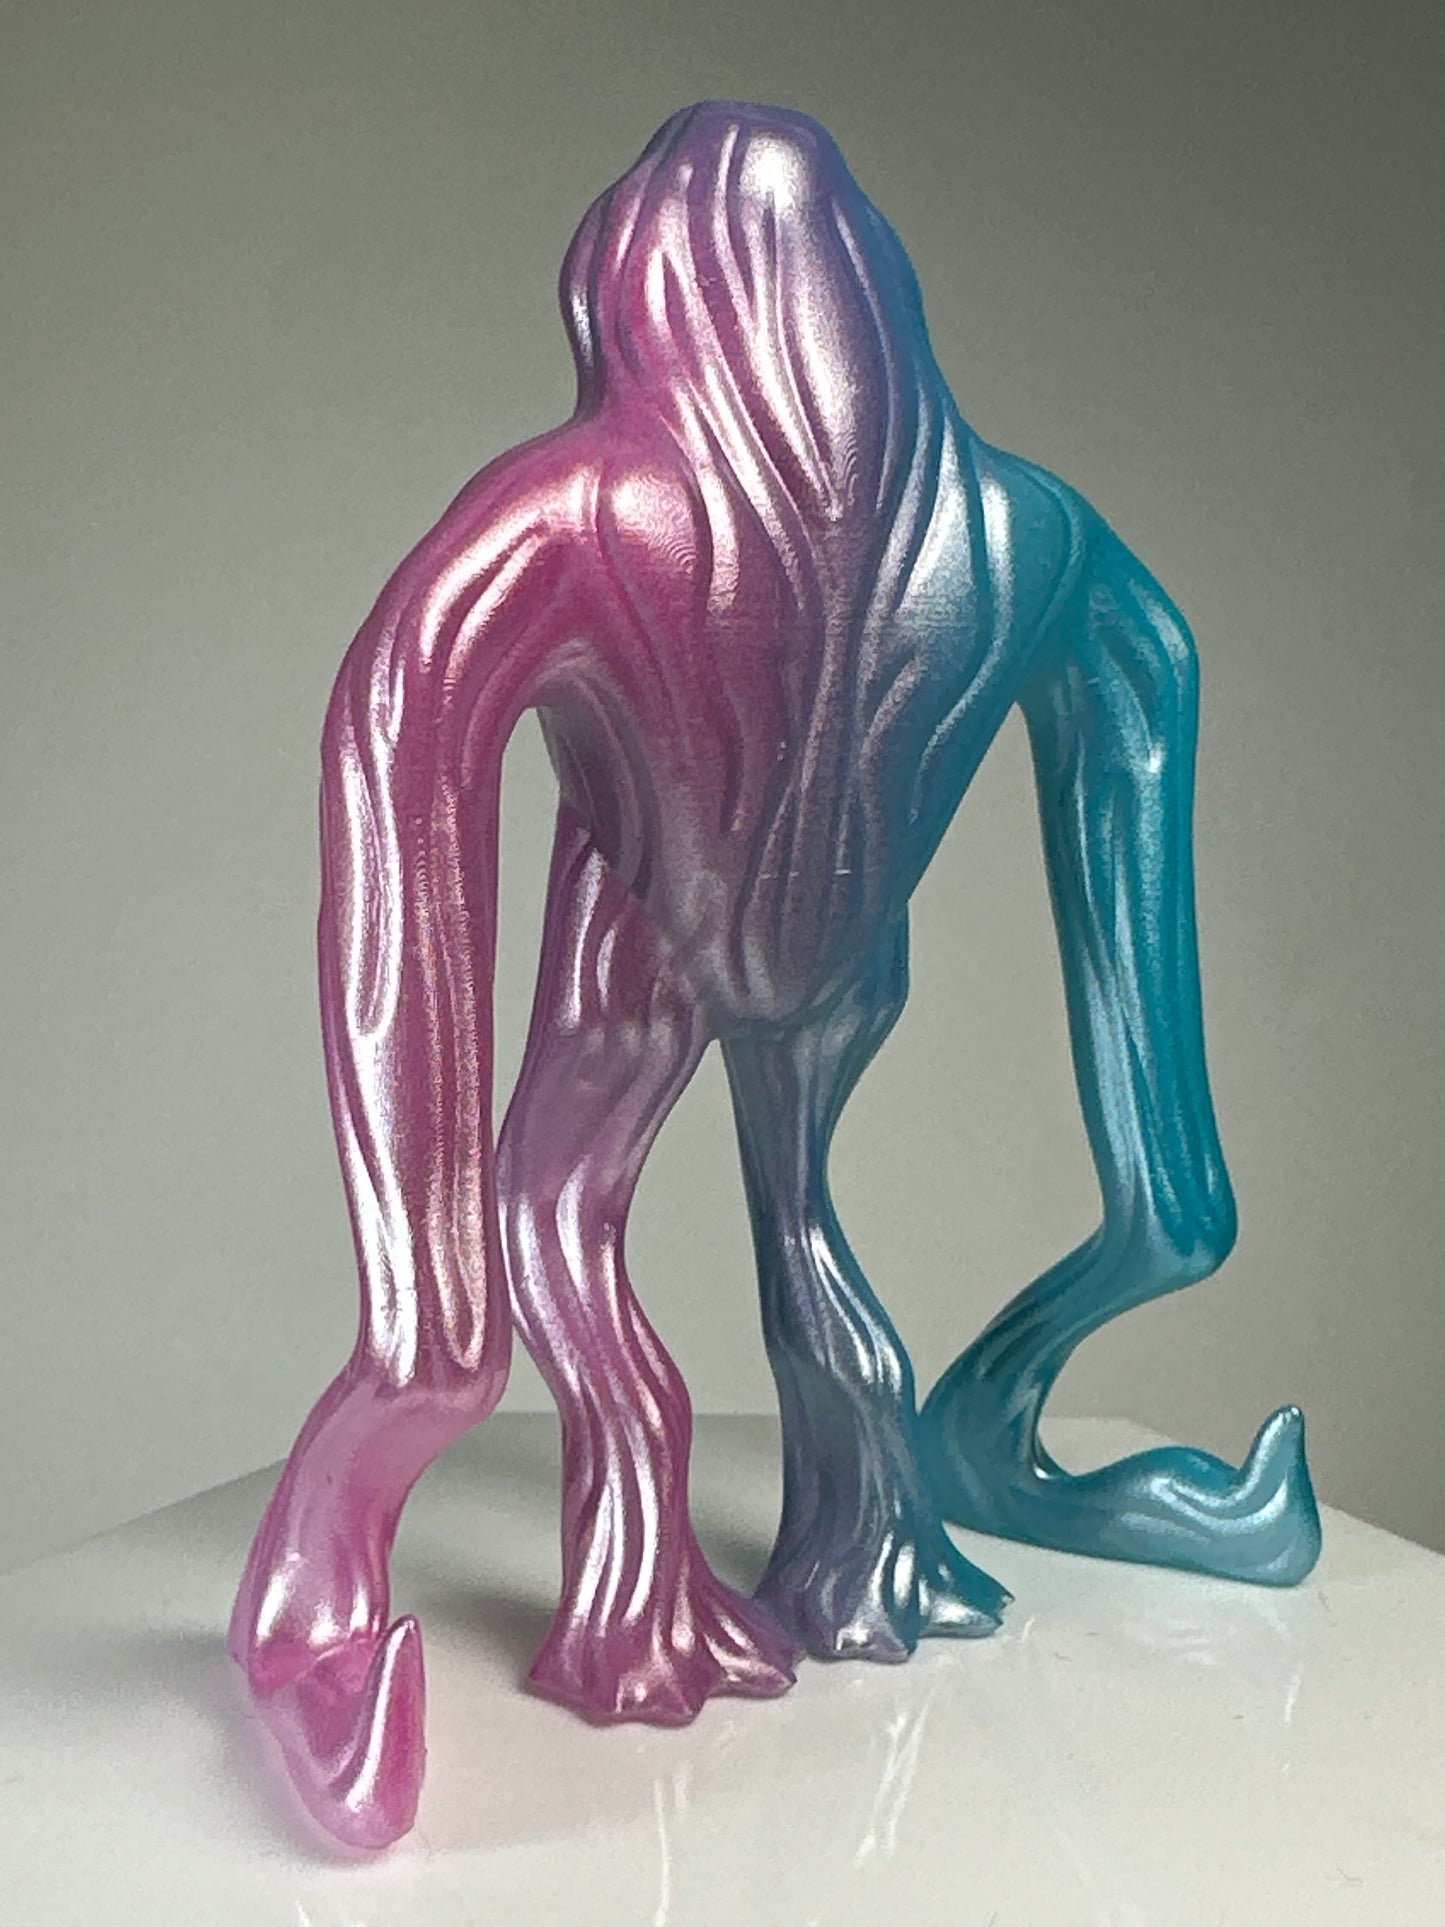 Sad Charlie: Pink and Blue Contortions